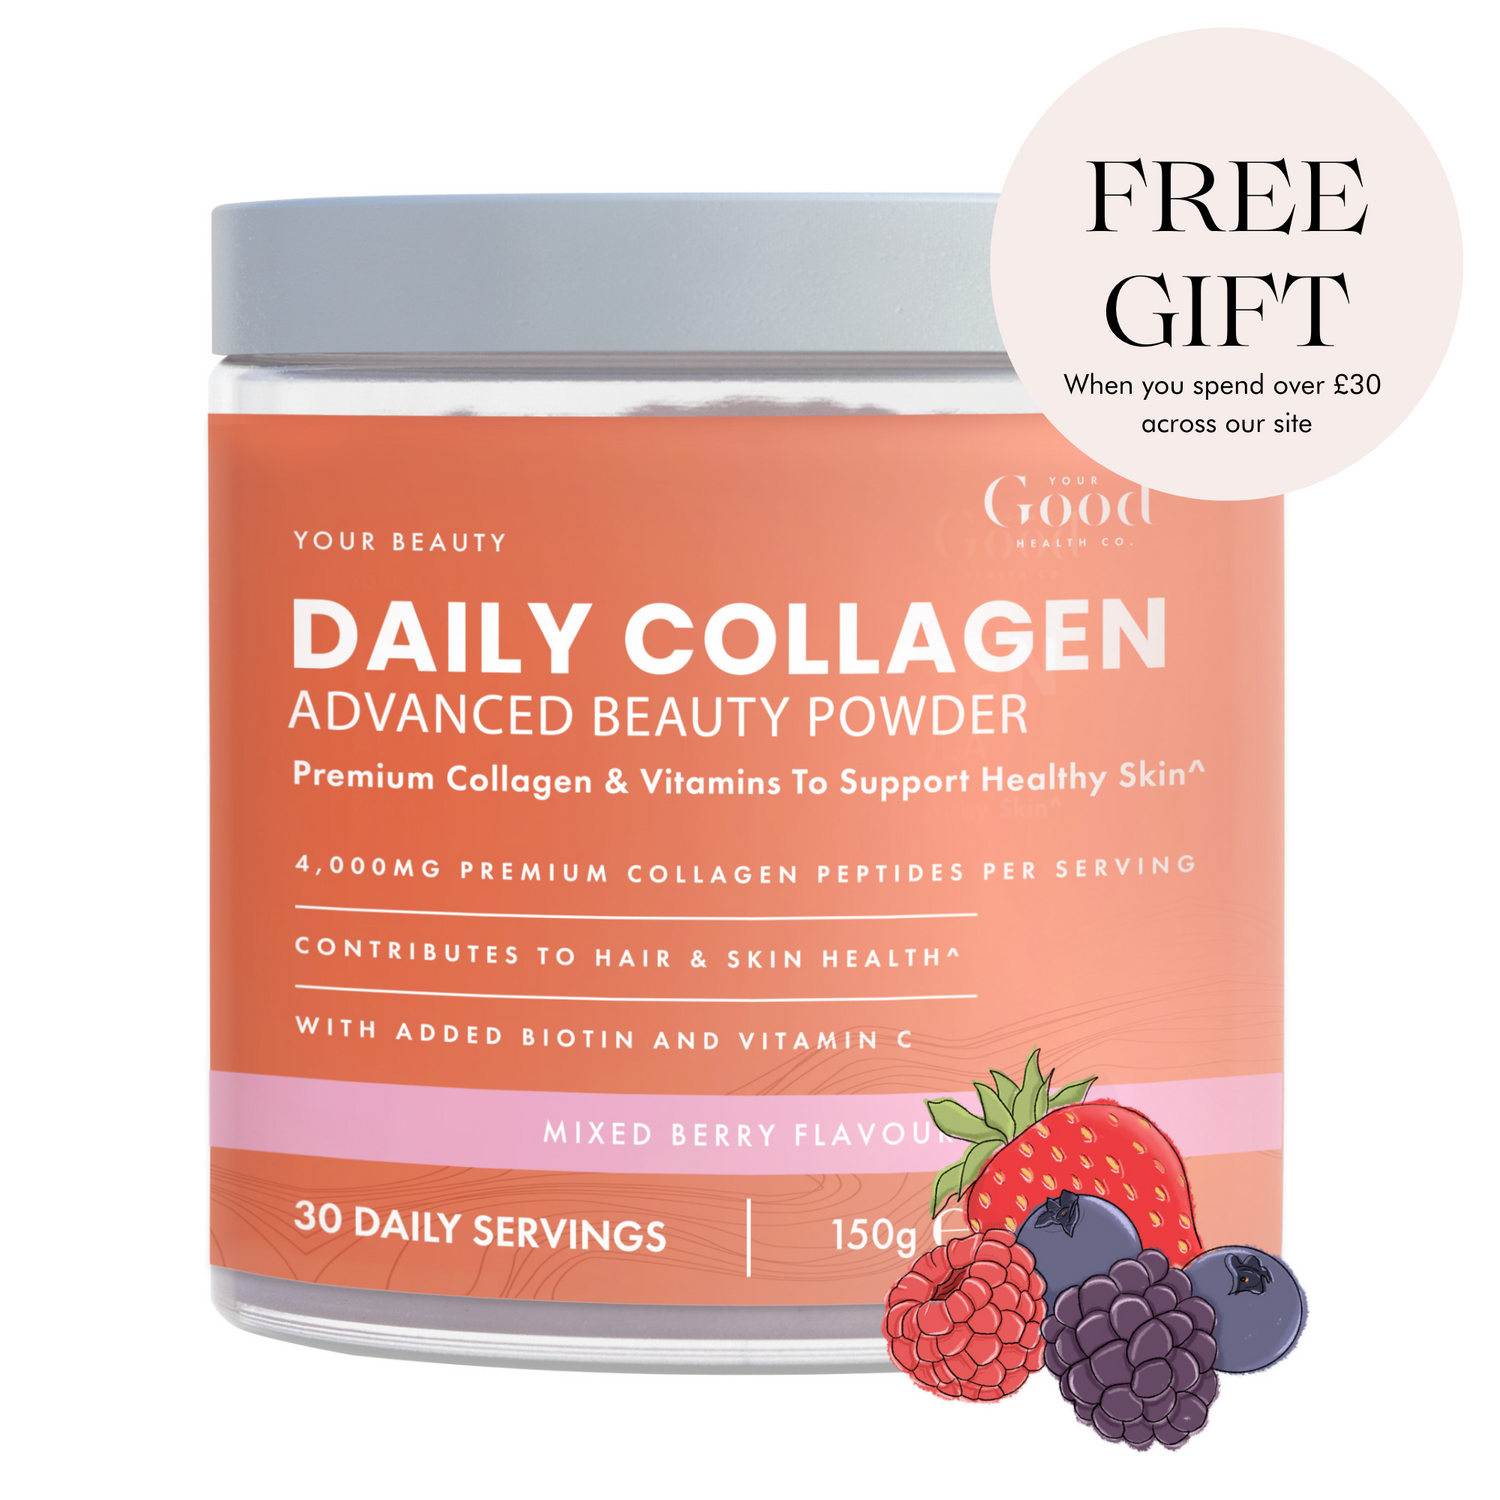 Discover the Benefits of Premium Collagen Supplements